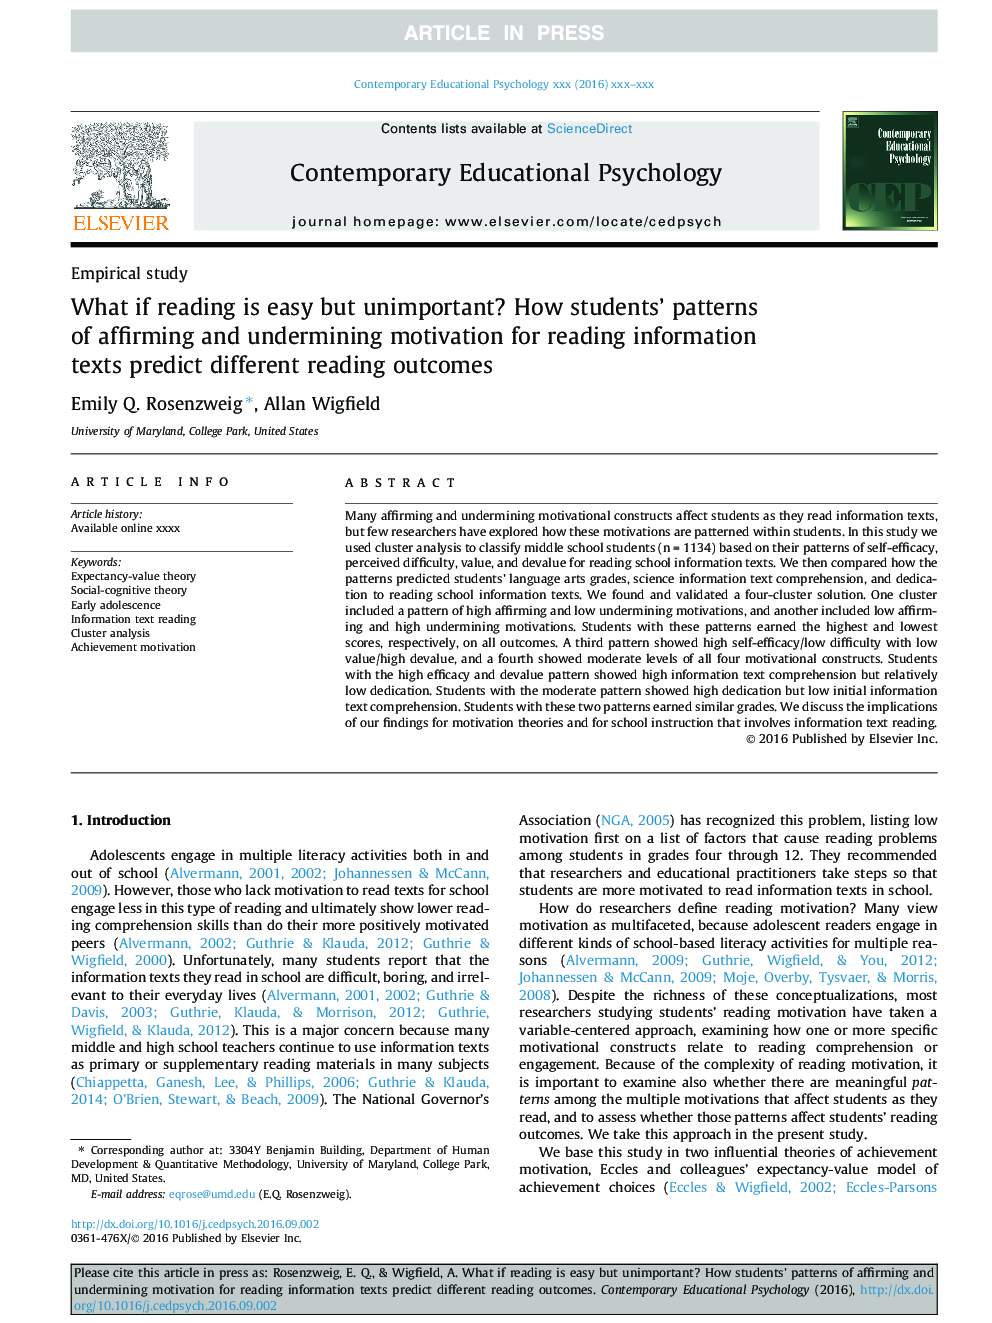 What if reading is easy but unimportant? How students' patterns of affirming and undermining motivation for reading information texts predict different reading outcomes